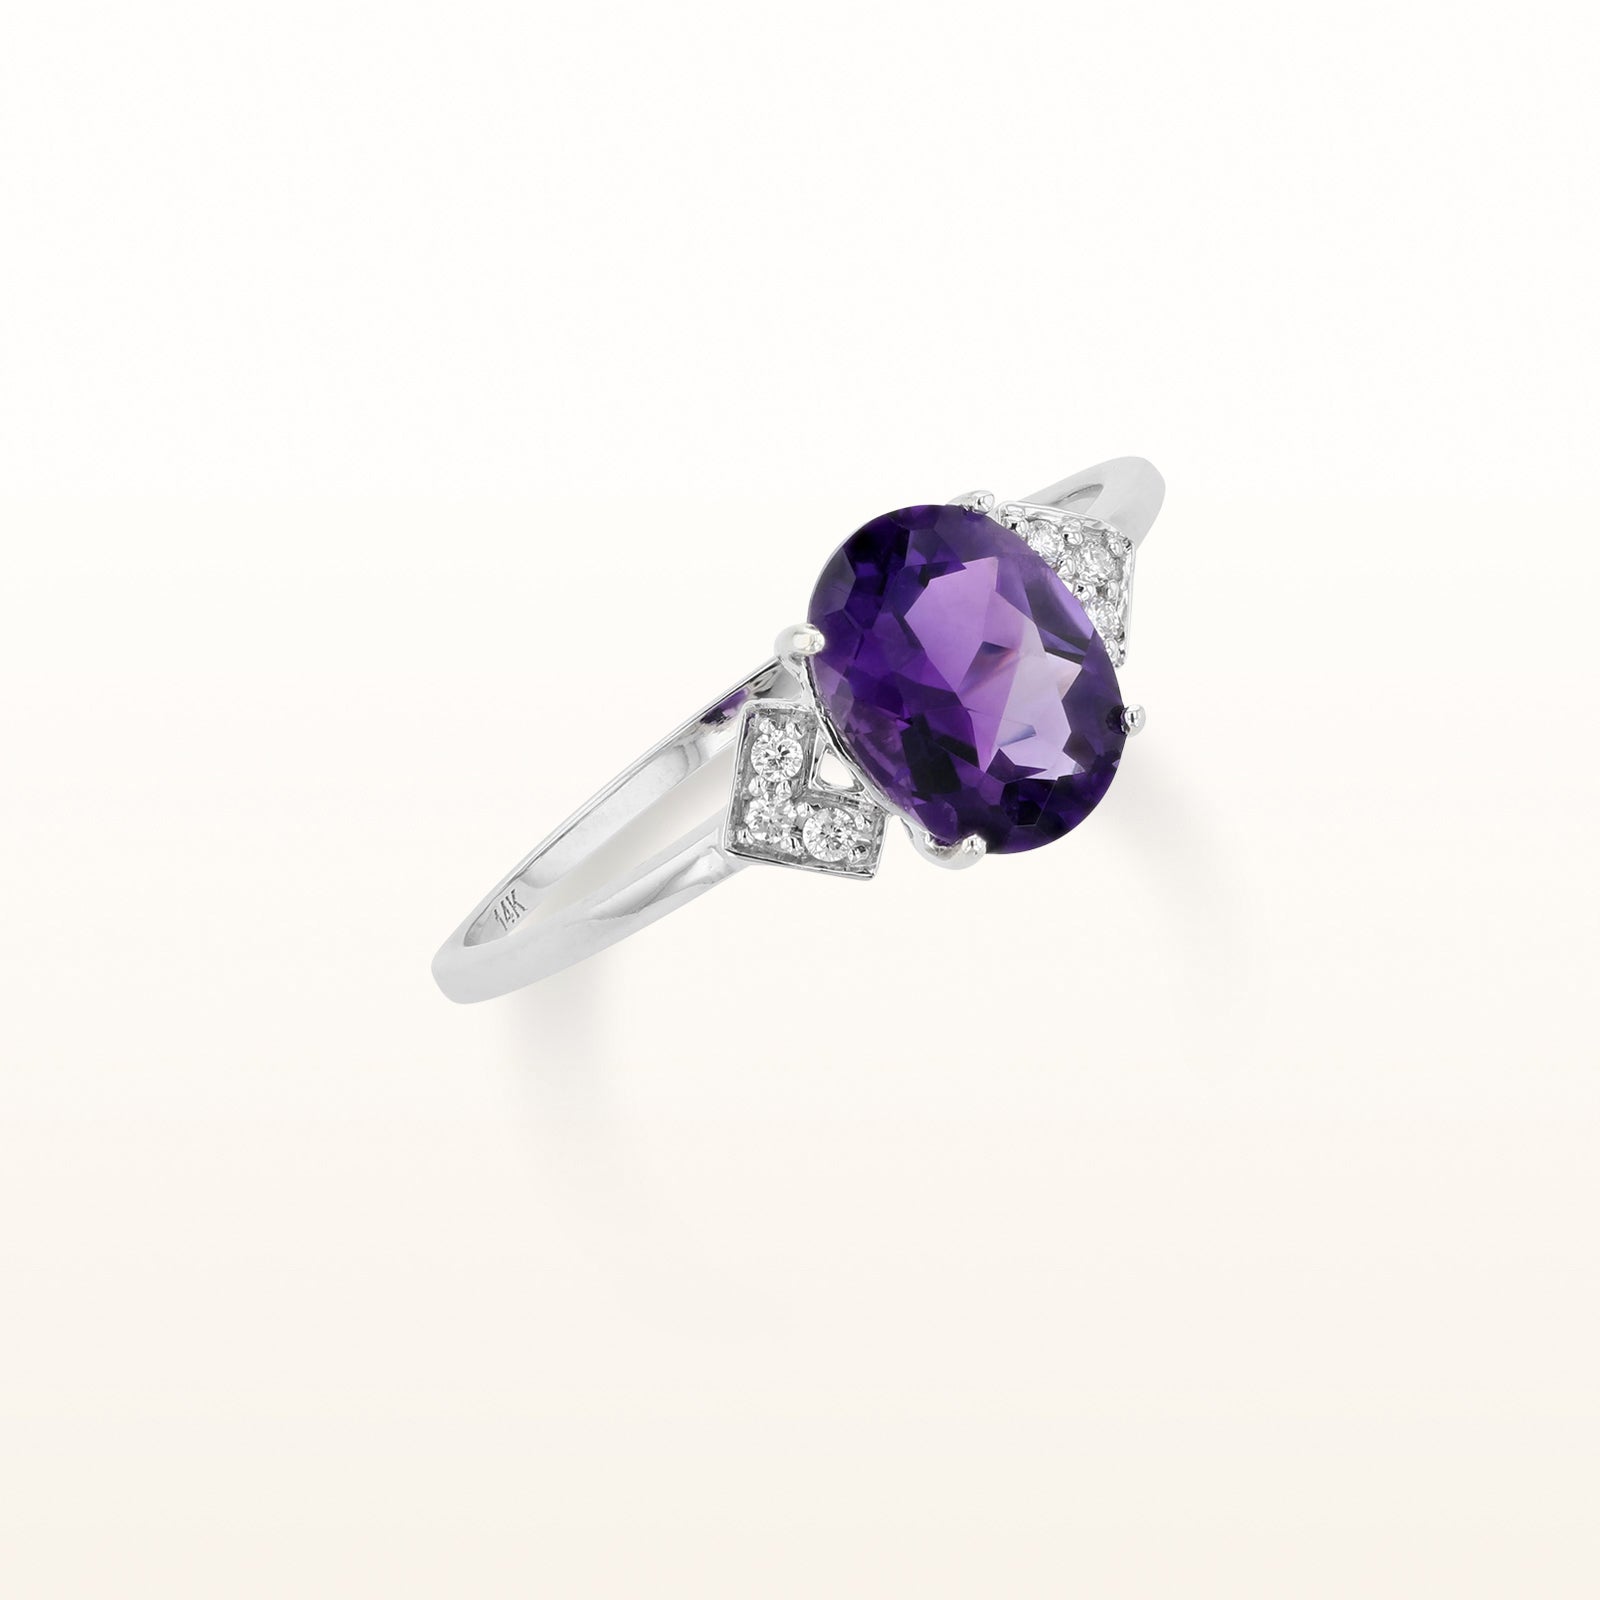 Oval Gemstone Ring with Diamond Accents in 14kt White Gold